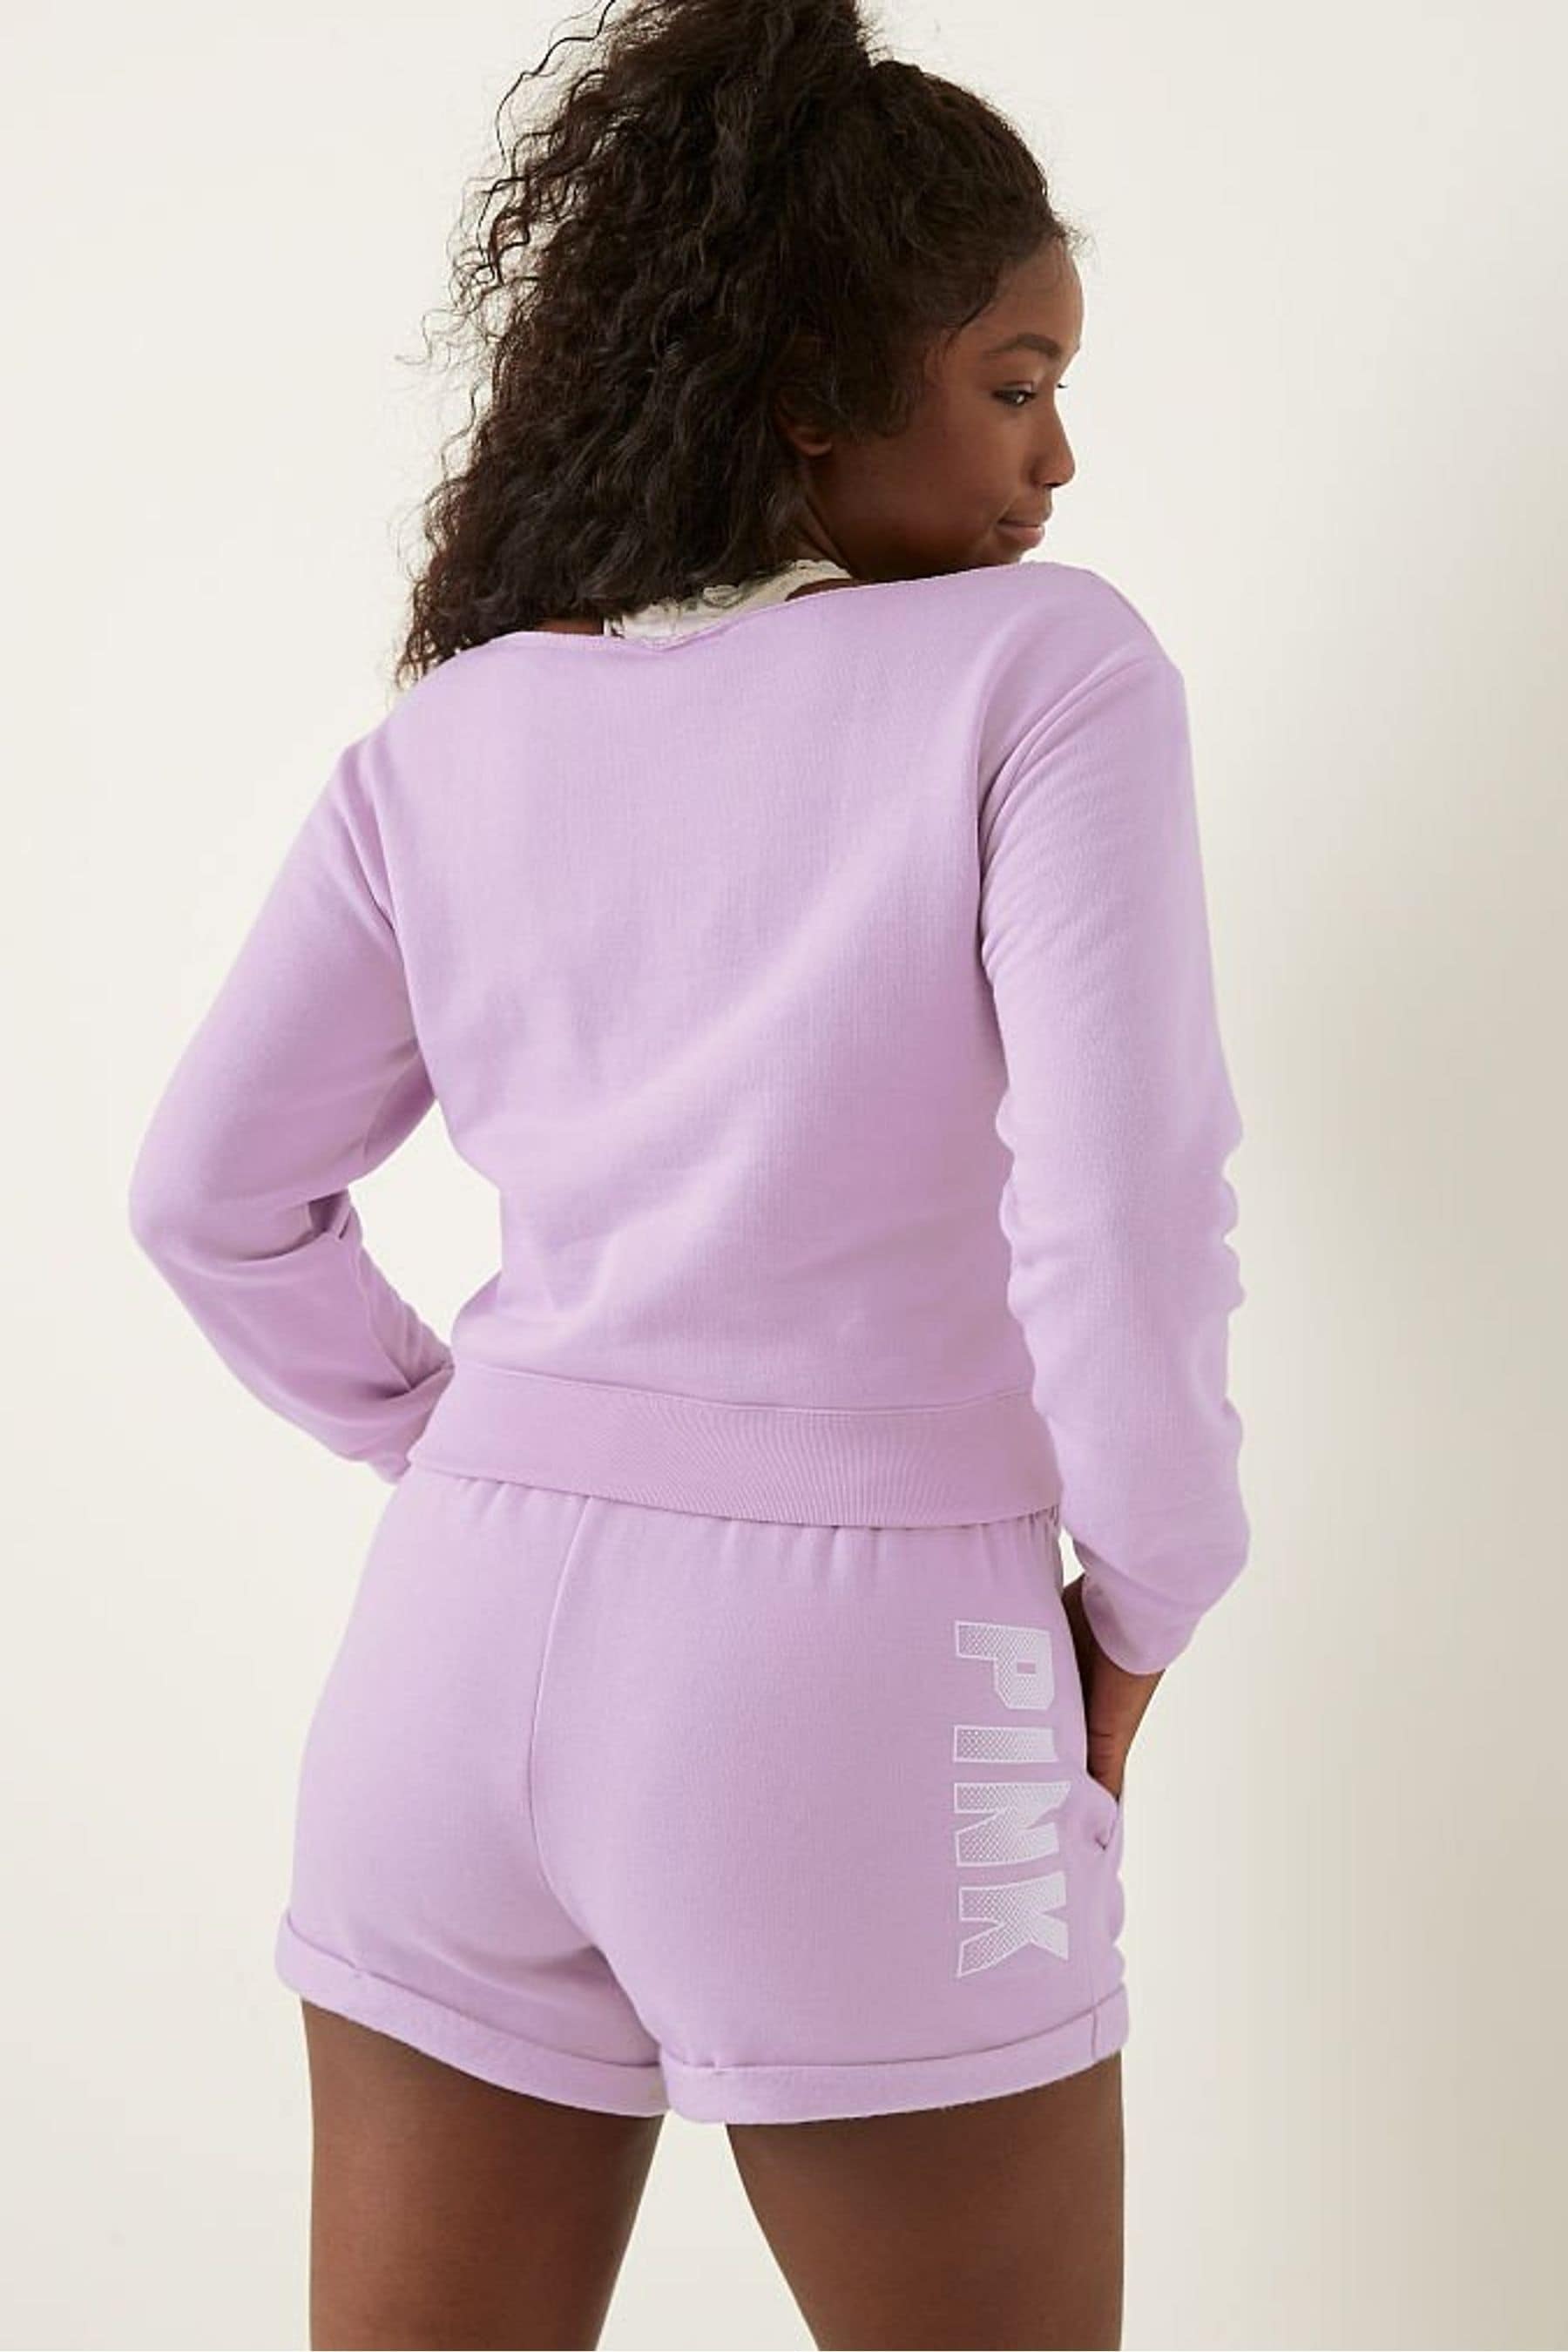 Buy Victoria's Secret PINK Everyday Lounge Open Neck Crew from the ...